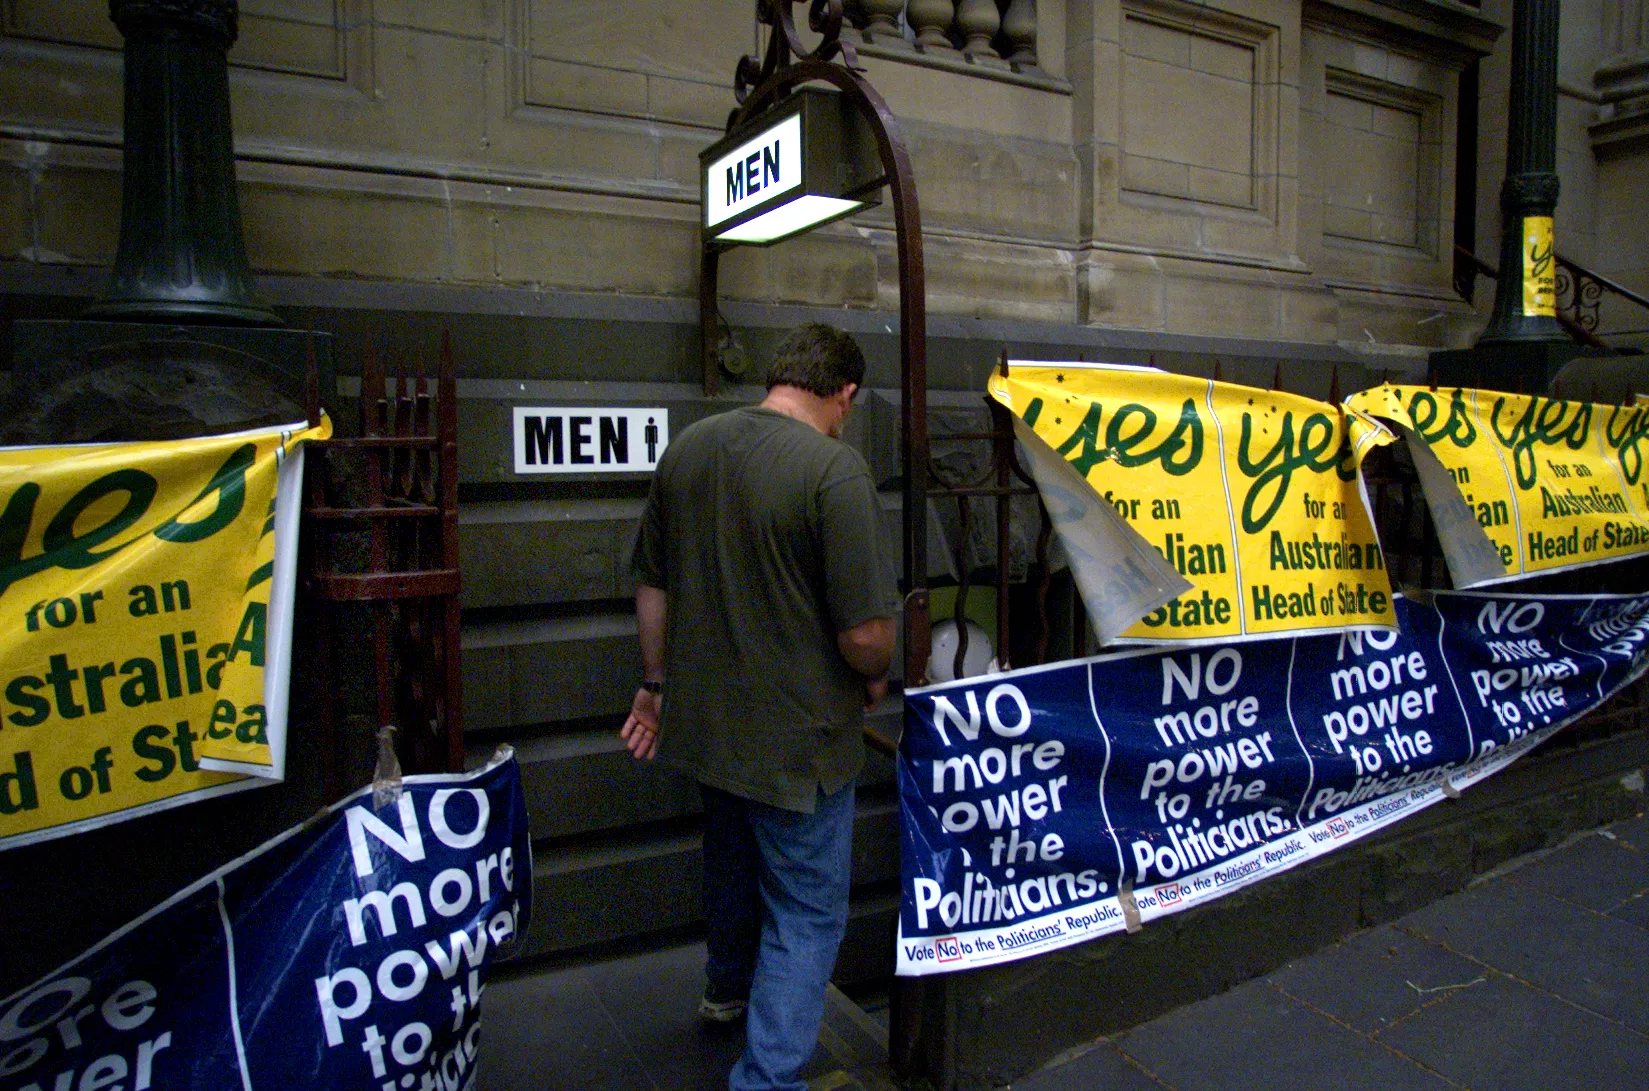 A voter walks past political banners on his way to the polling booth at Melbourne Town Hall during the republic referendum, 6 November 1999.